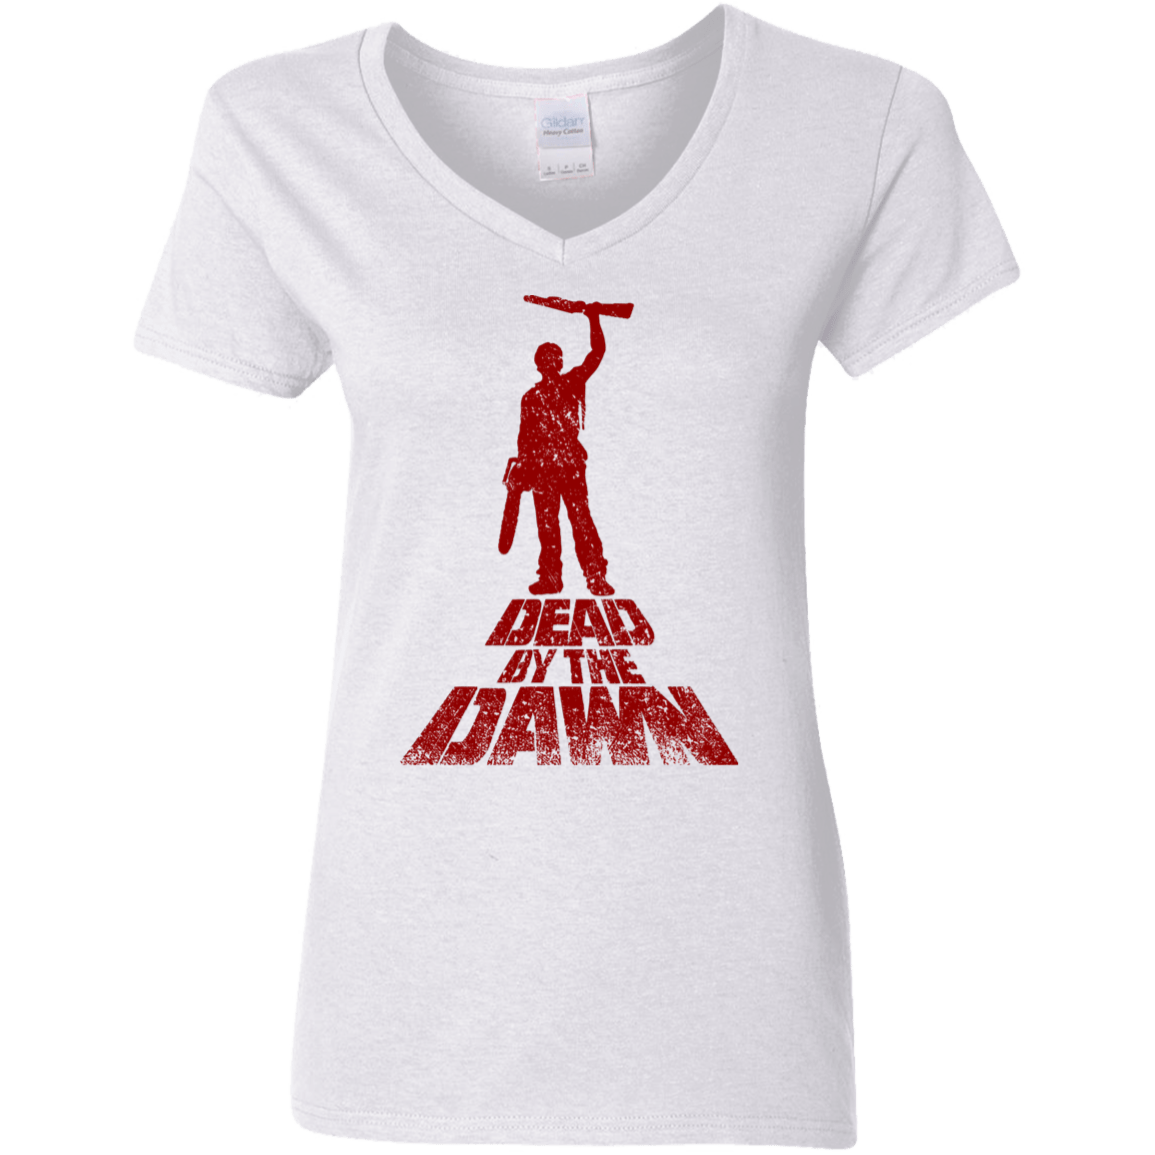 T-Shirts White / S Dead by the Dawn Women's V-Neck T-Shirt